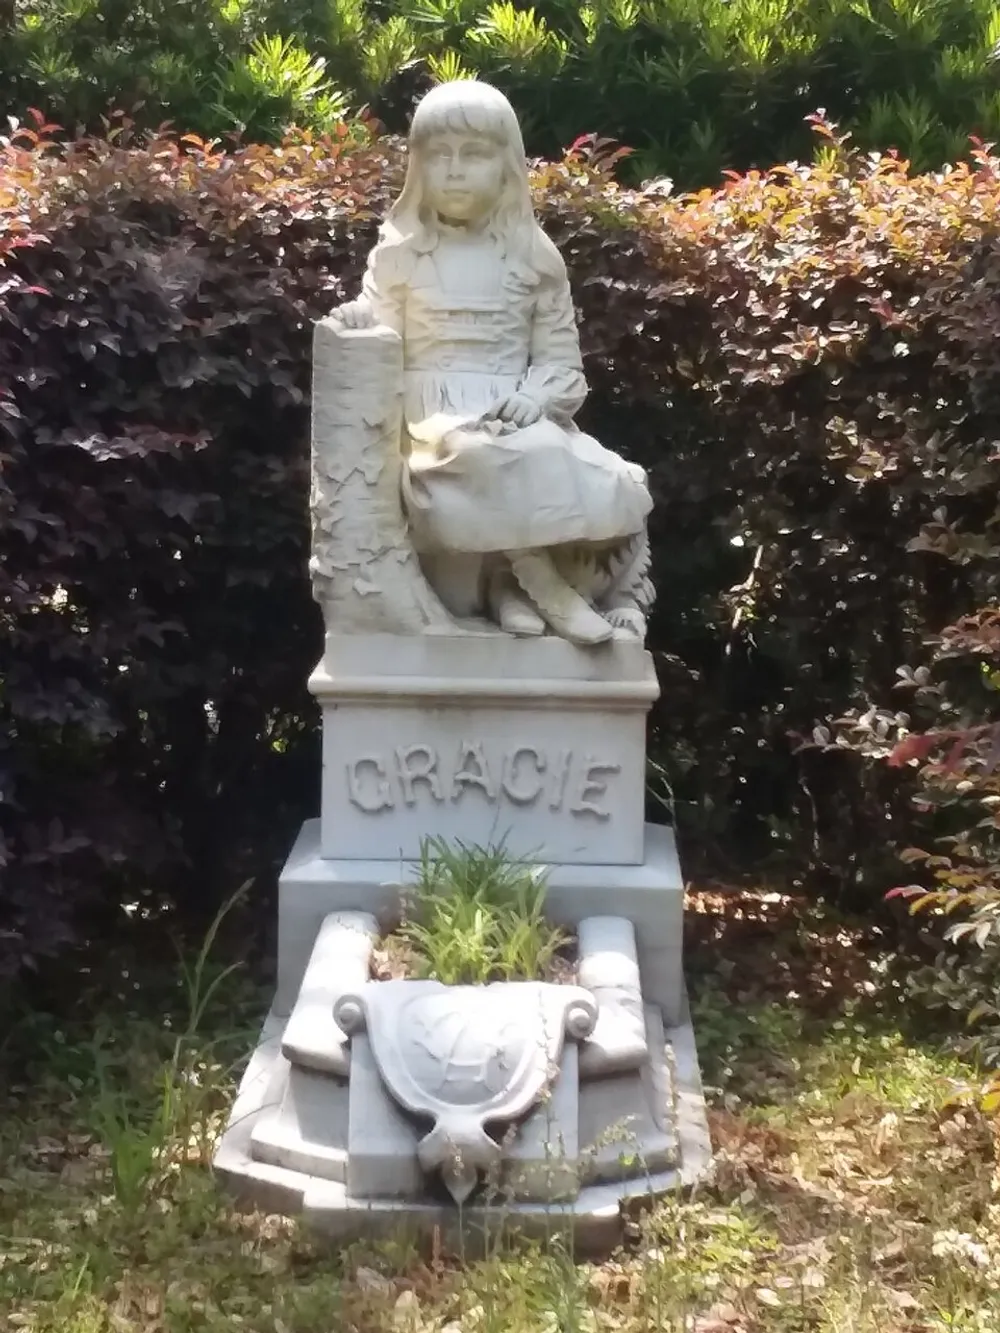 The image shows a stone statue of a young girl named Gracie sitting next to a pedestal with a serene expression nestled among greenery